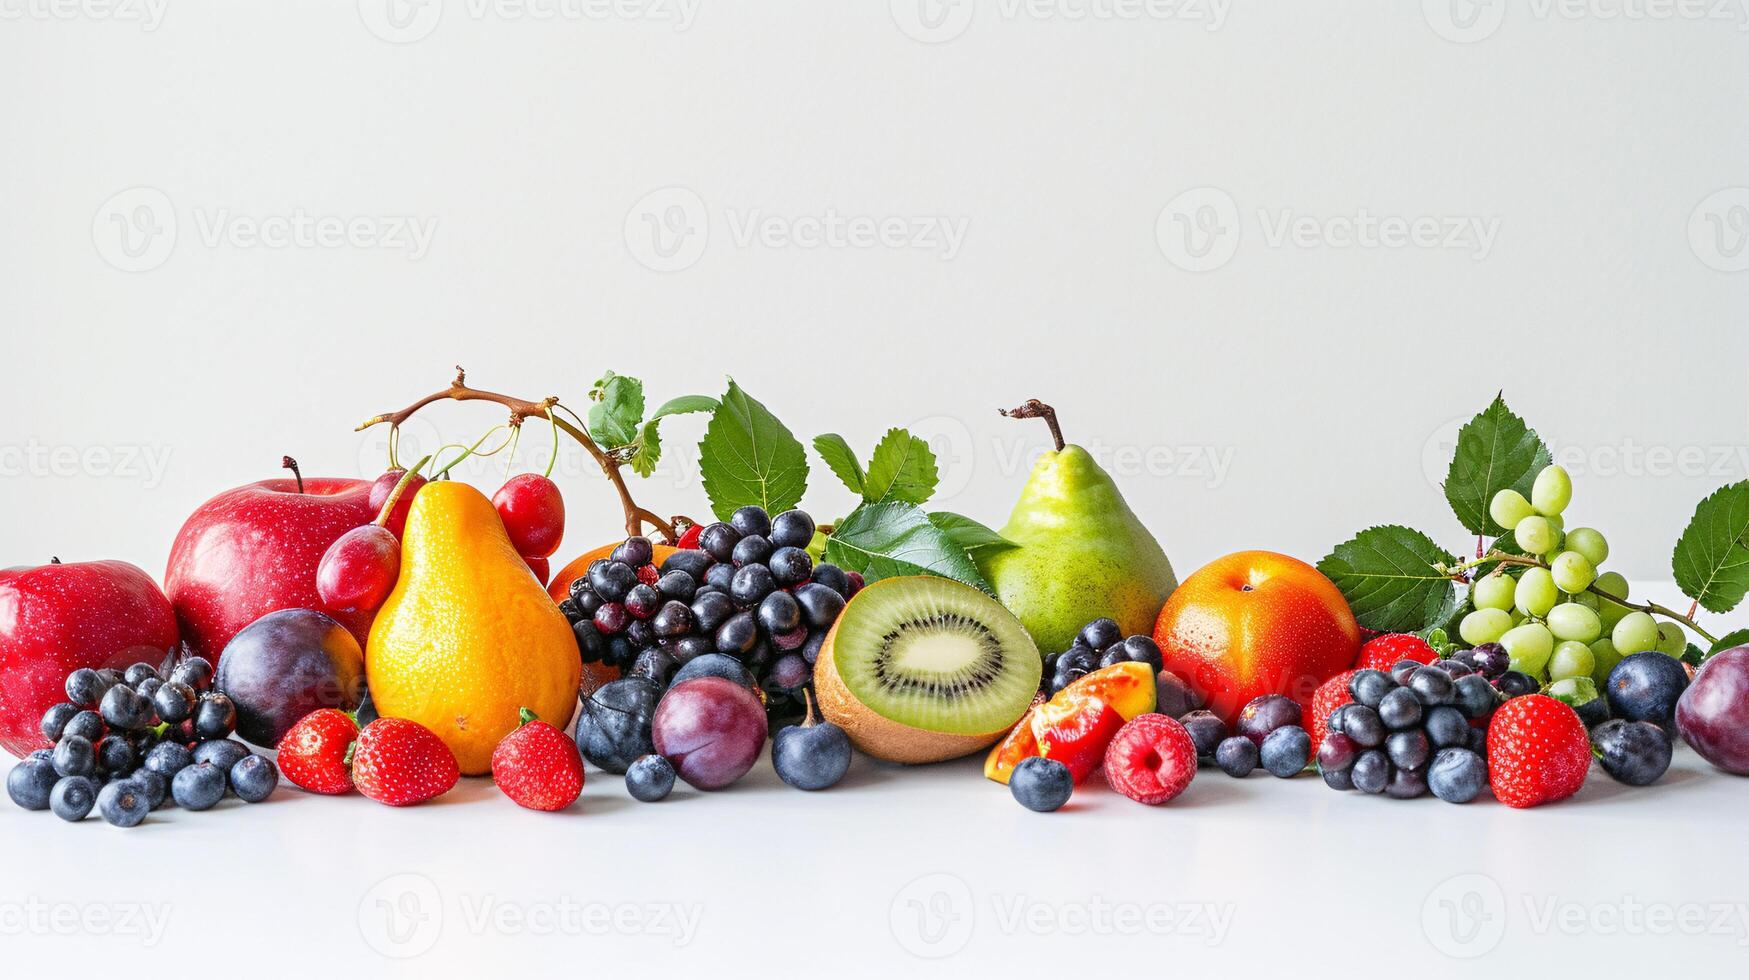 A bountiful selection of fresh, vibrant fruits are scattered artfully on the pristine white background photo